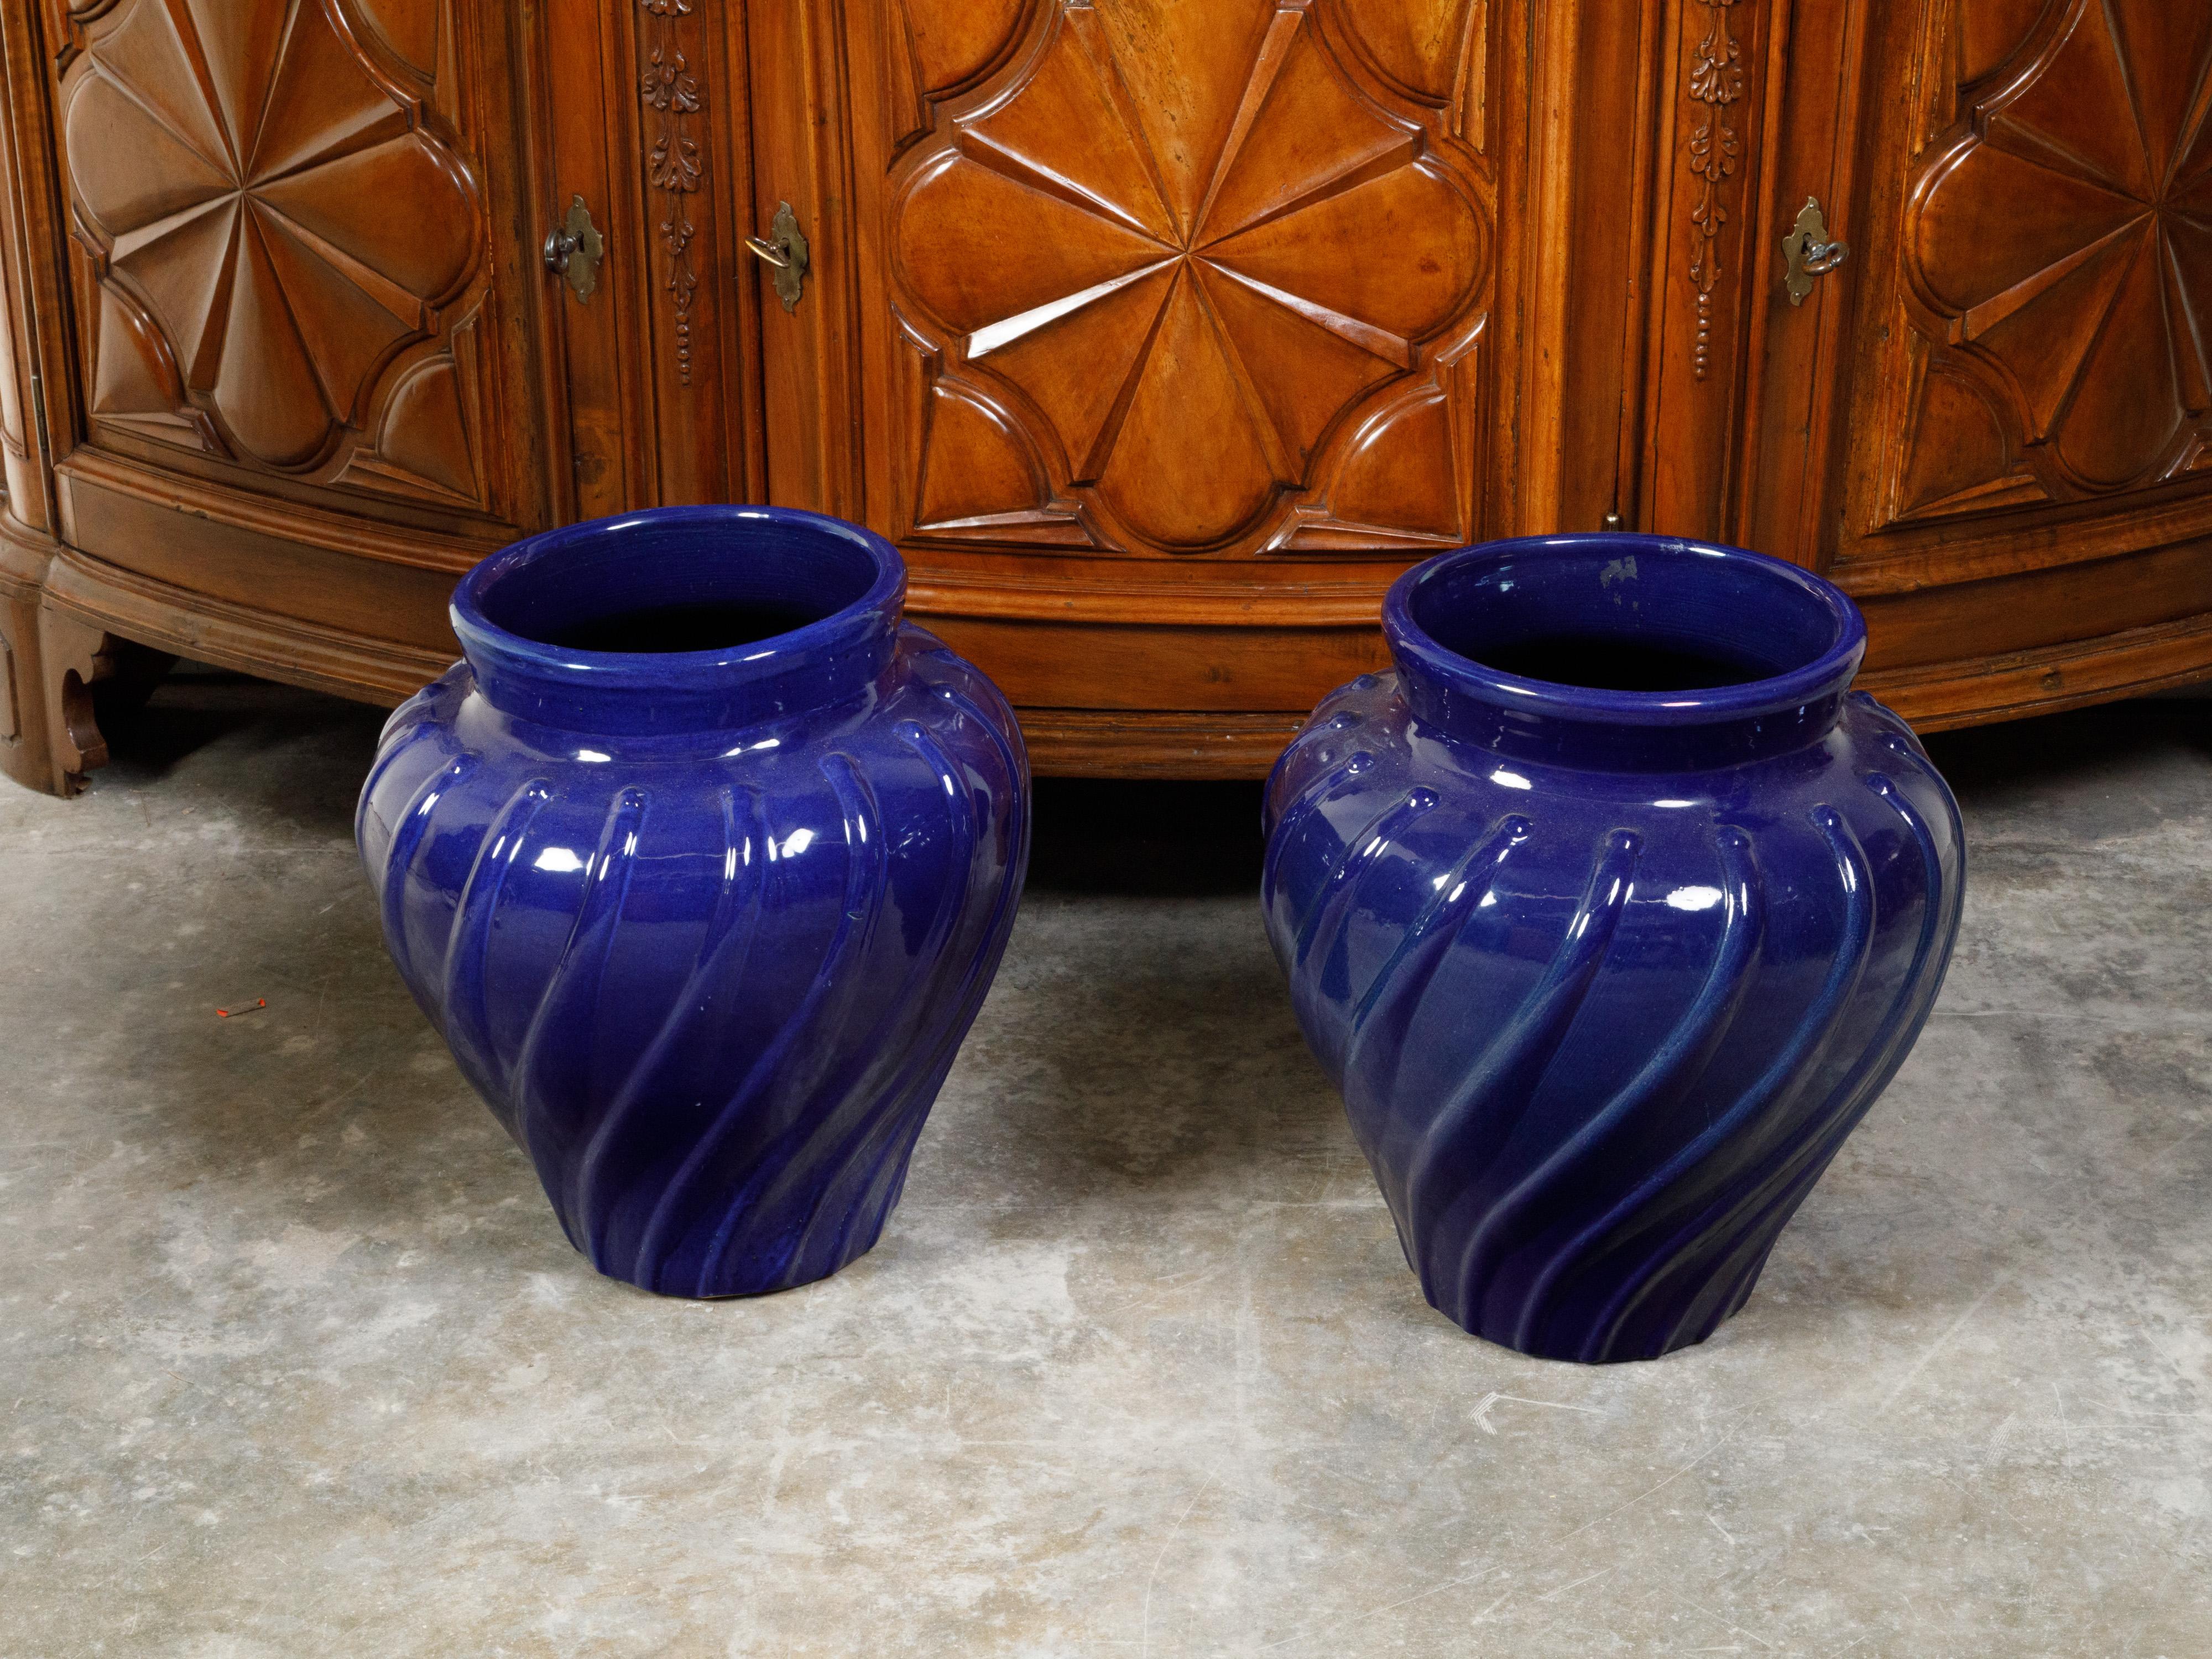 Pair of 1920s Cobalt Blue Pottery Planters with Wavy Patterns For Sale 2